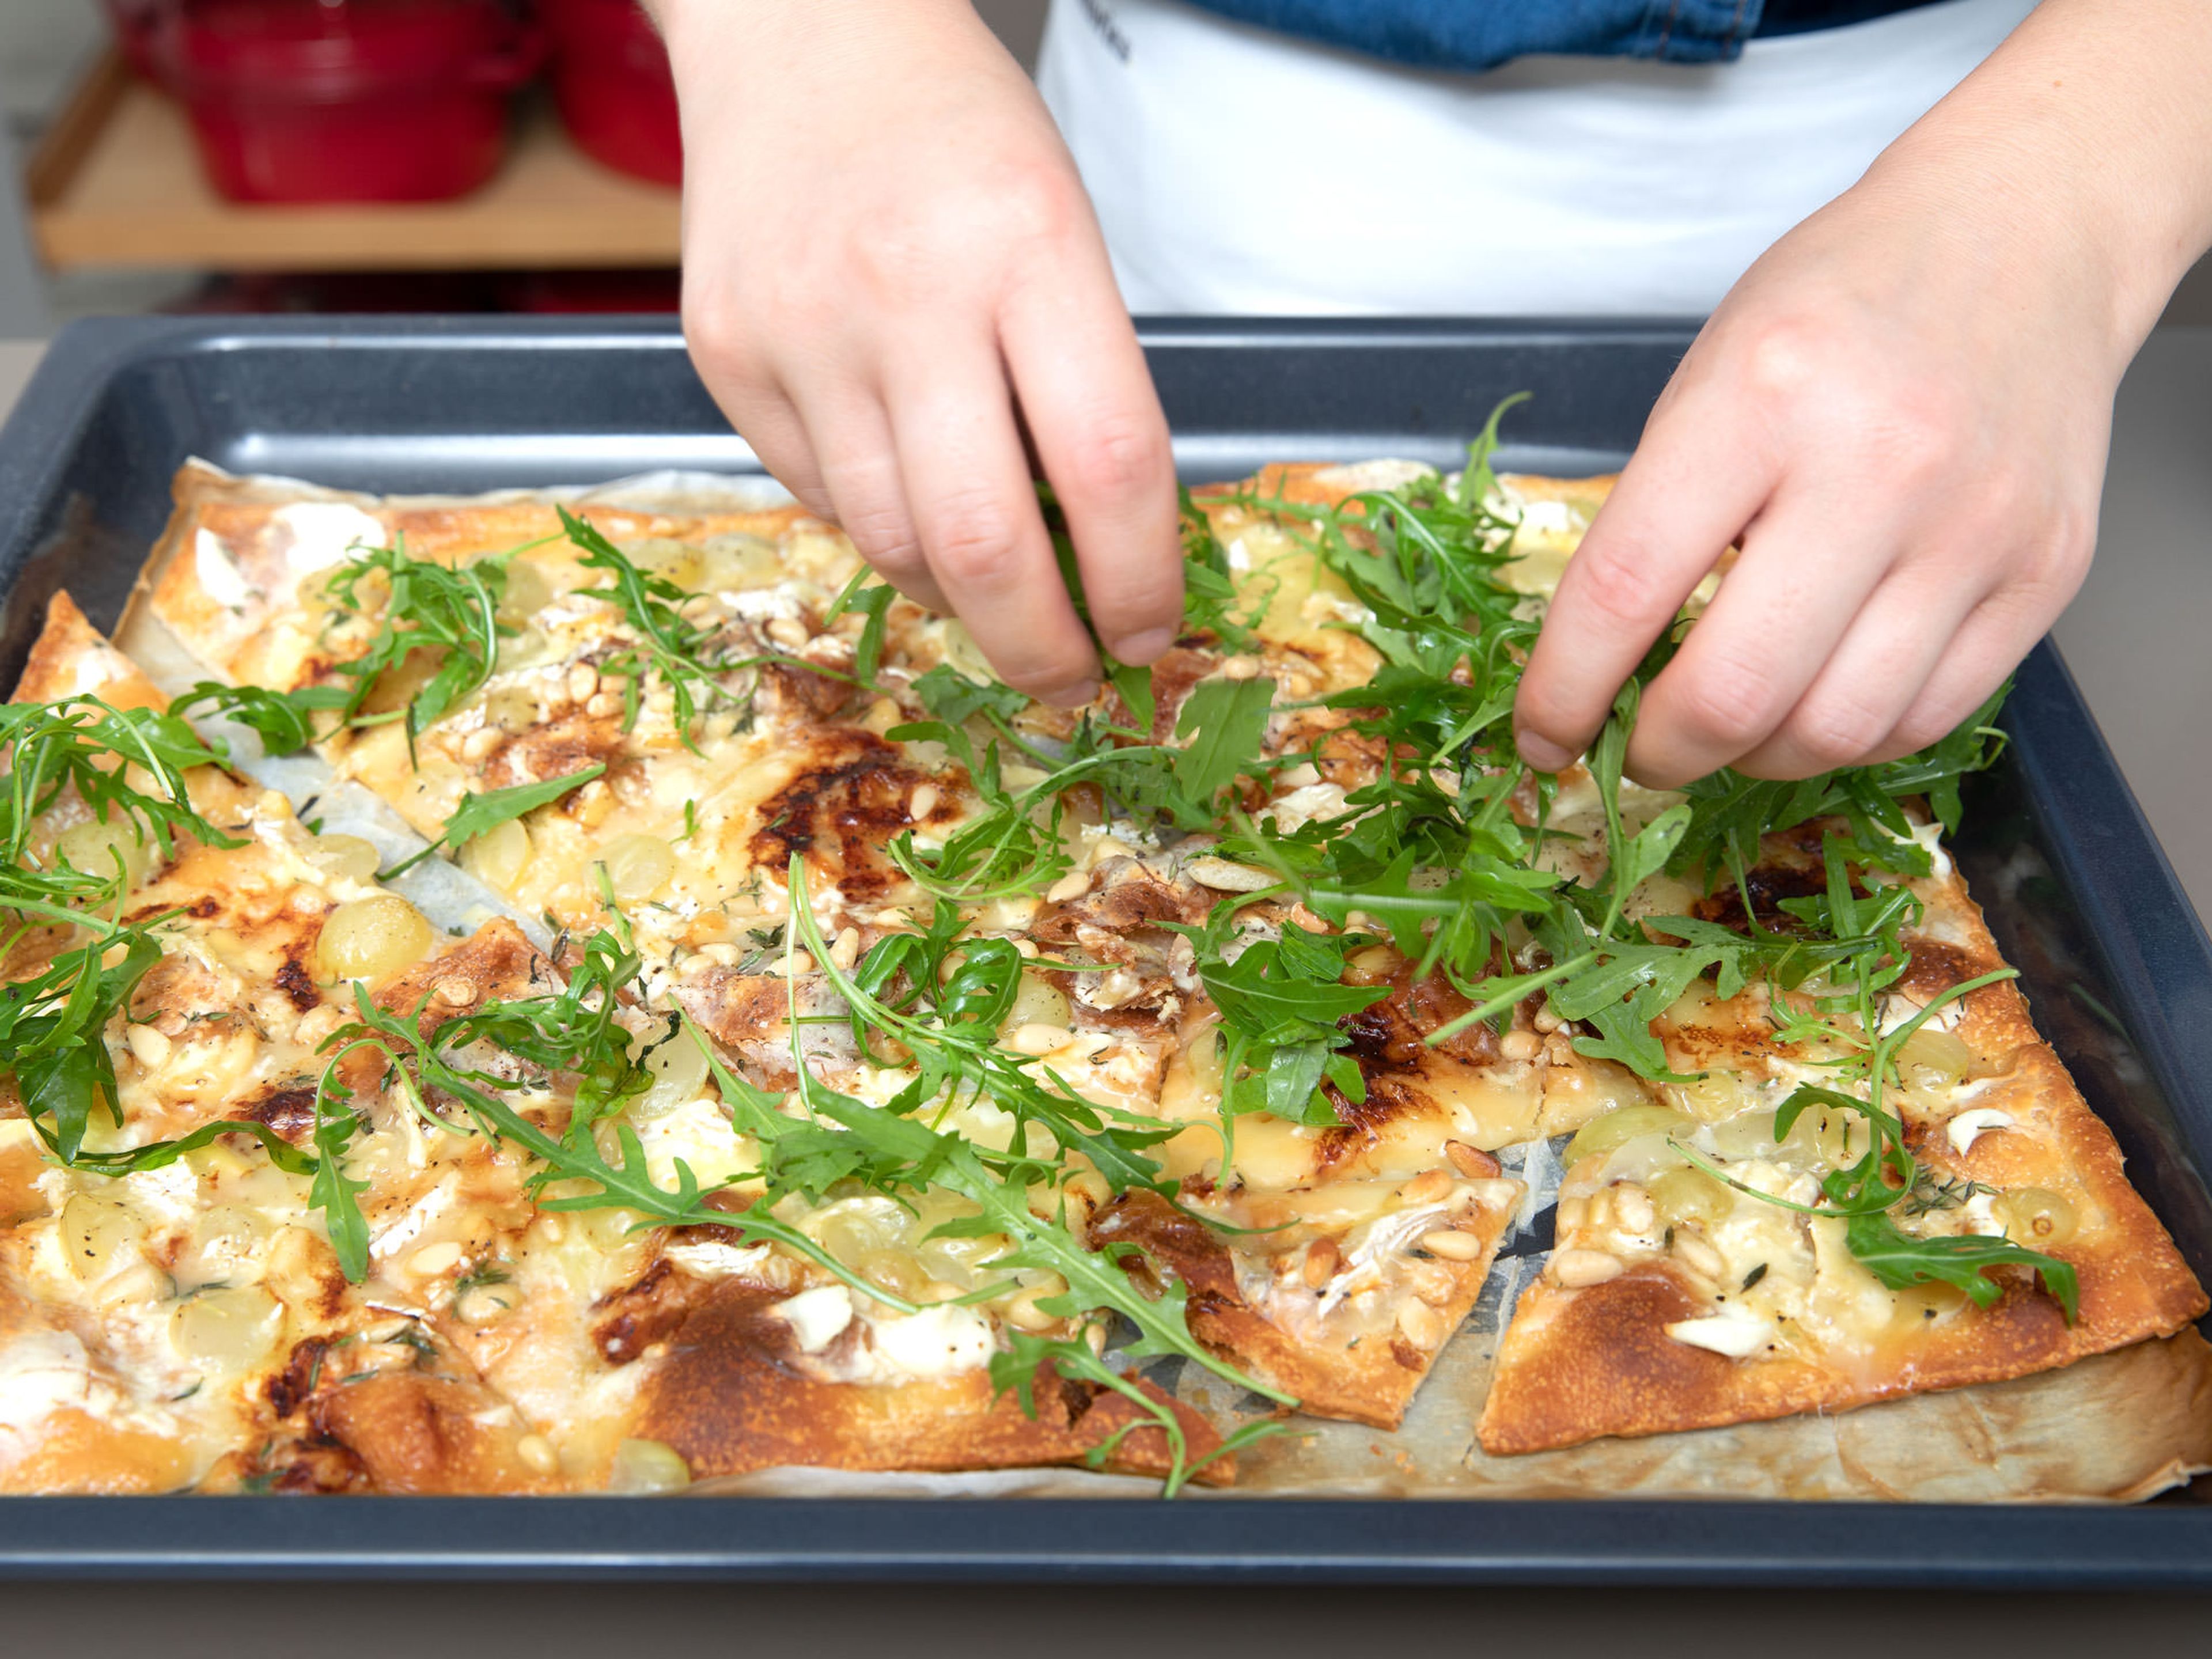 Transfer the pizza bake to the oven and bake at 240°C/460°F for approx. 6 – 8 min., or until the cheese starts melting and the pizza is crispy. Serve with fresh arugula on top. Enjoy!